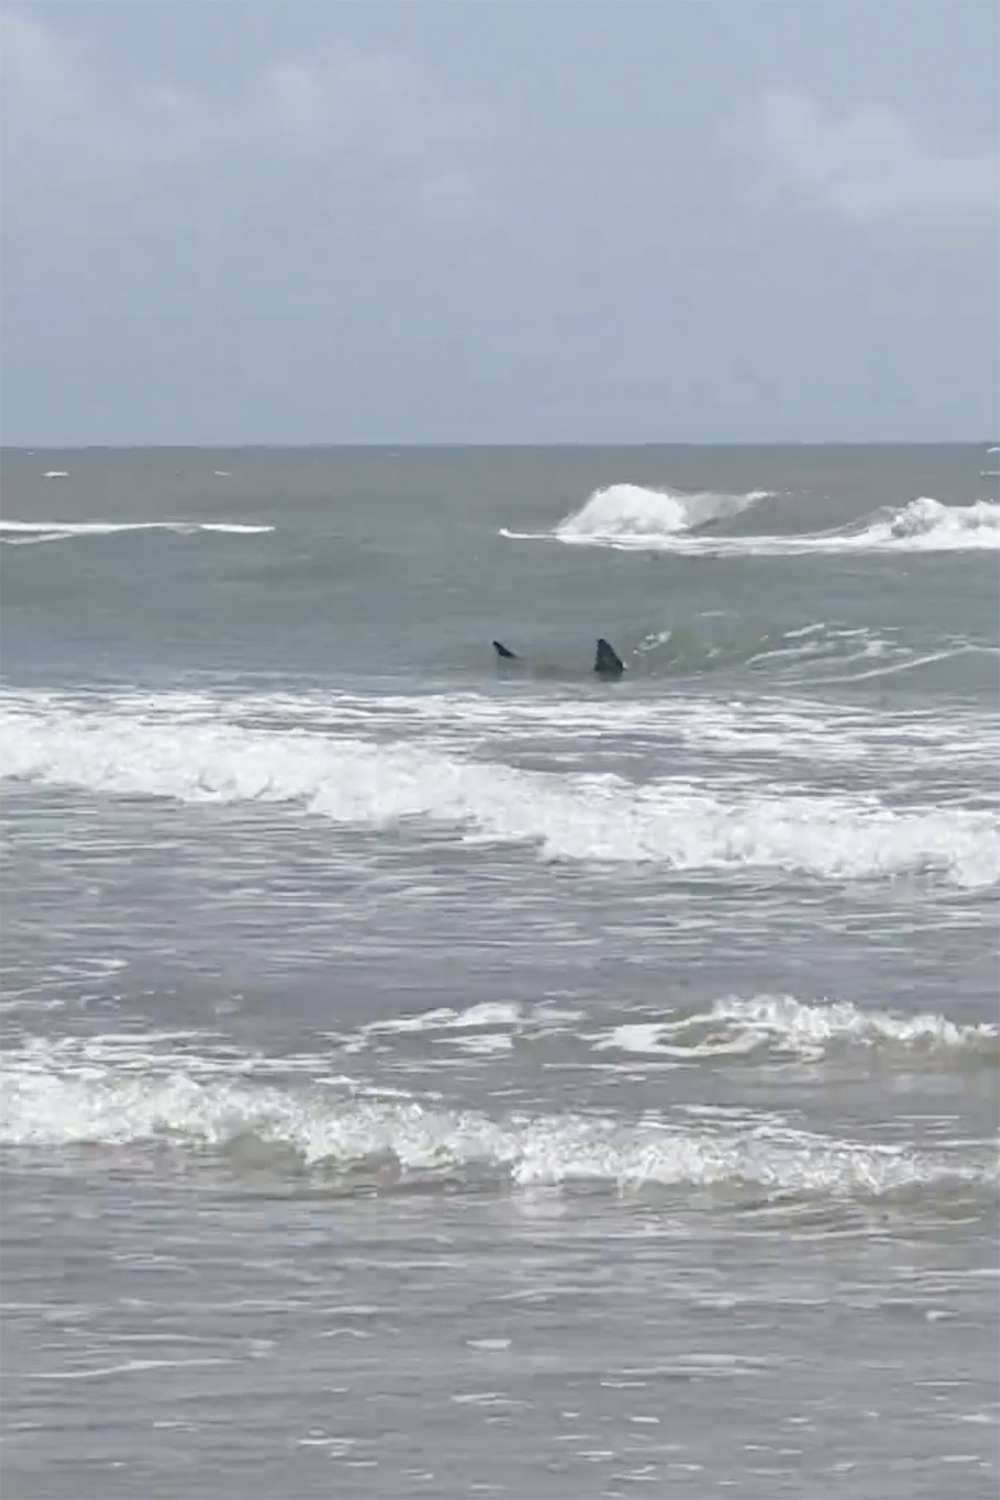 This image provided by Katie McMillan shows sharks near the shore on South Padre Island, Texas on Thursday, July 4, 2024. Shark attacks disrupted Fourth of July celebrations as two people were taken to the hospital with bites, at least one of them severe, authorities said. (Katie McMillan via AP)